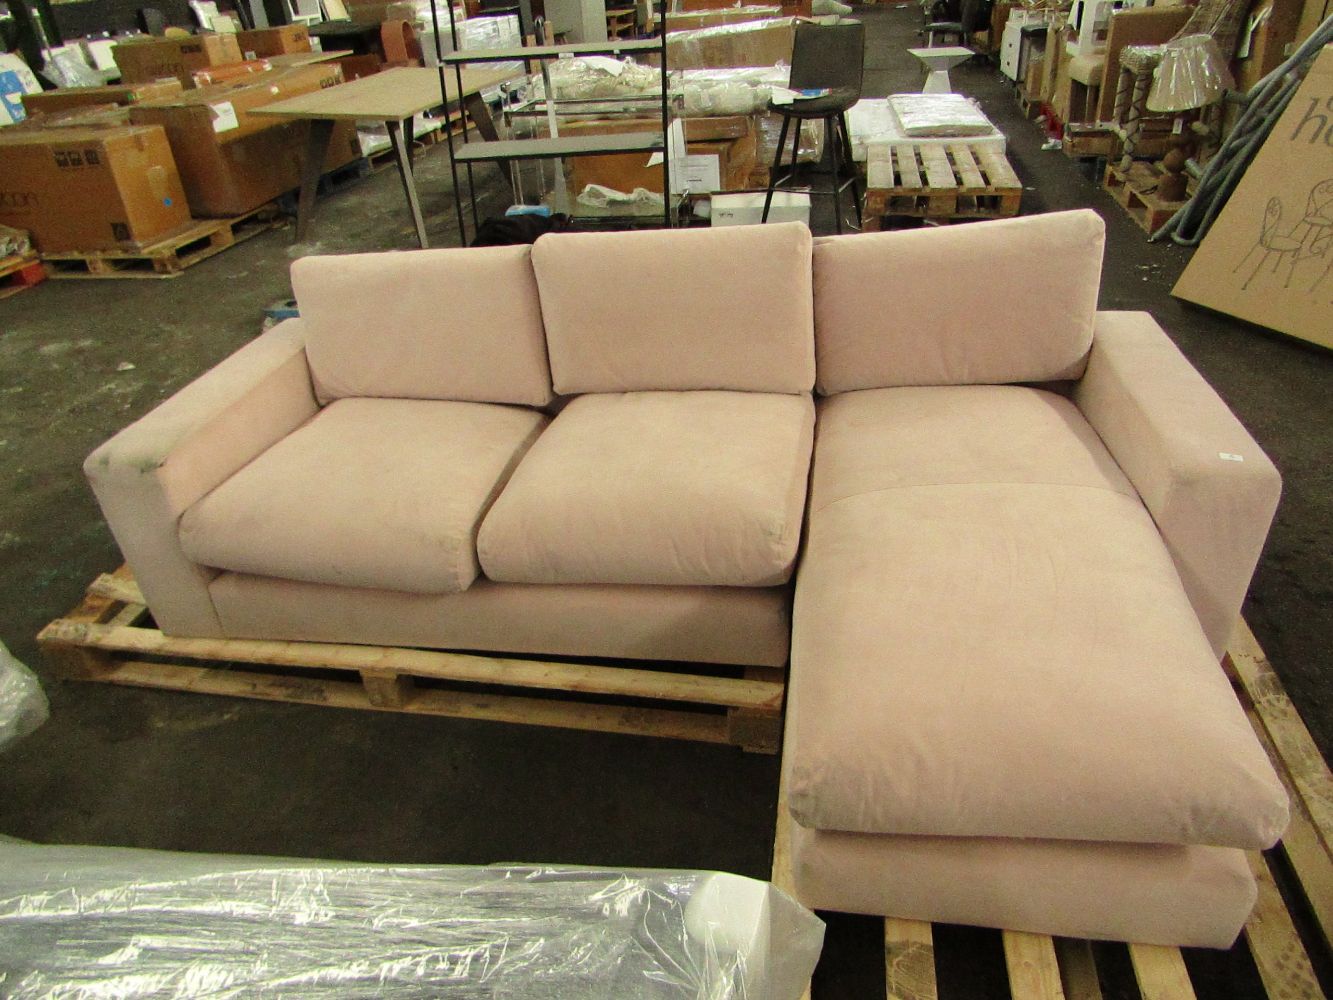 Special 10% Buyers Premium!, Sofas From Costco, Swoon, Cavendish and more